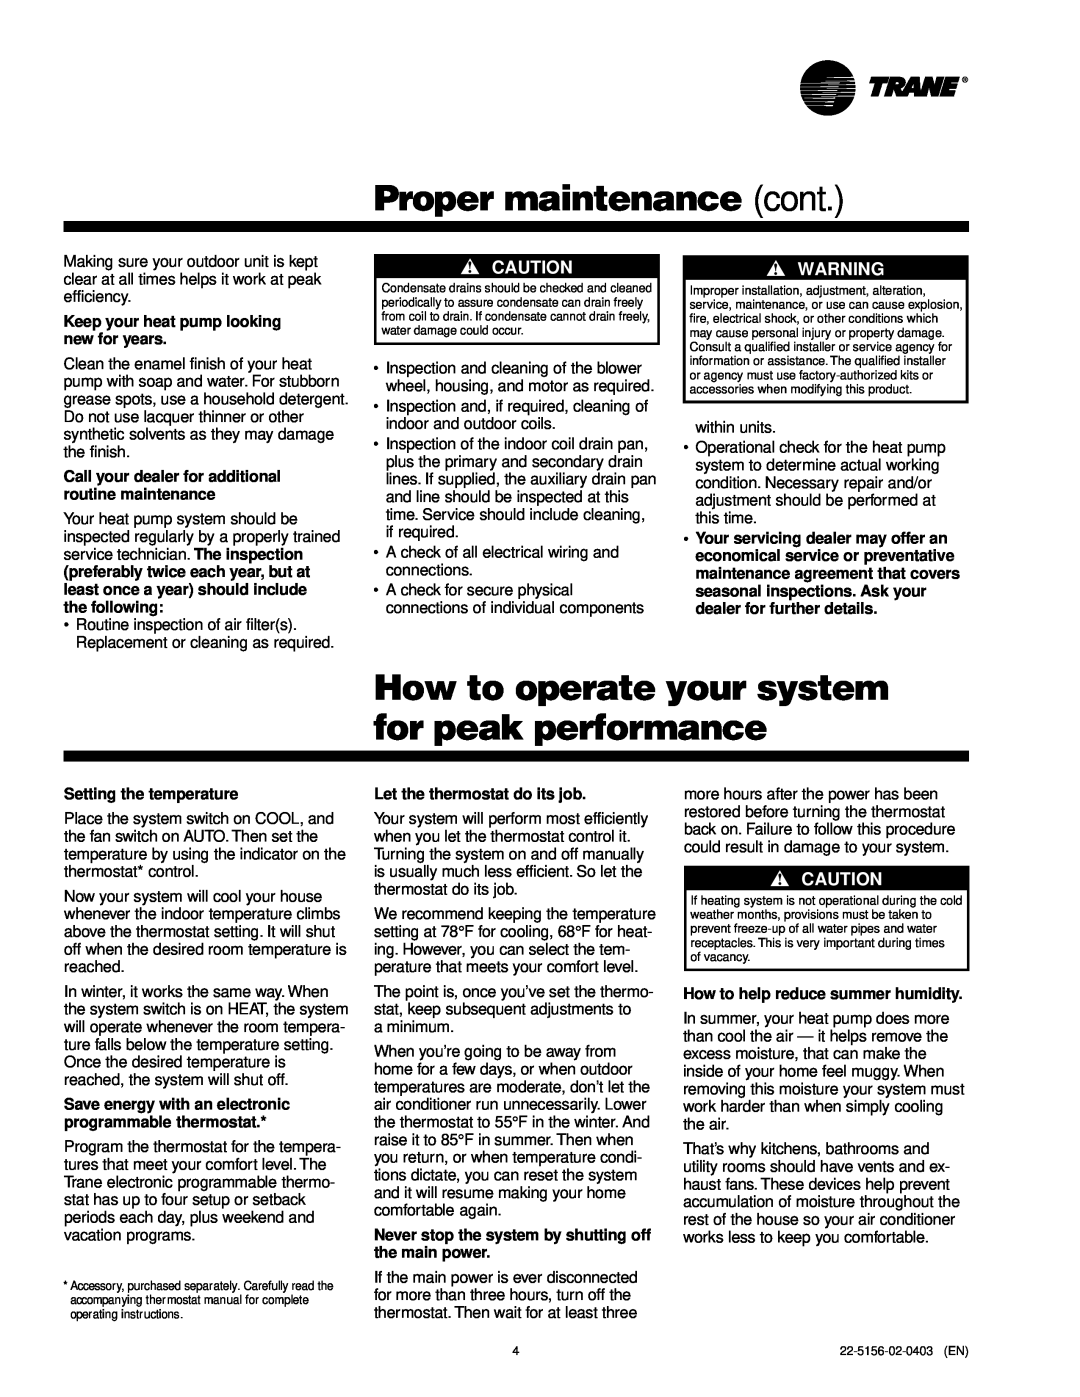 Trane XL Series manual Proper maintenance cont, How to operate your system for peak performance, Setting the temperature 